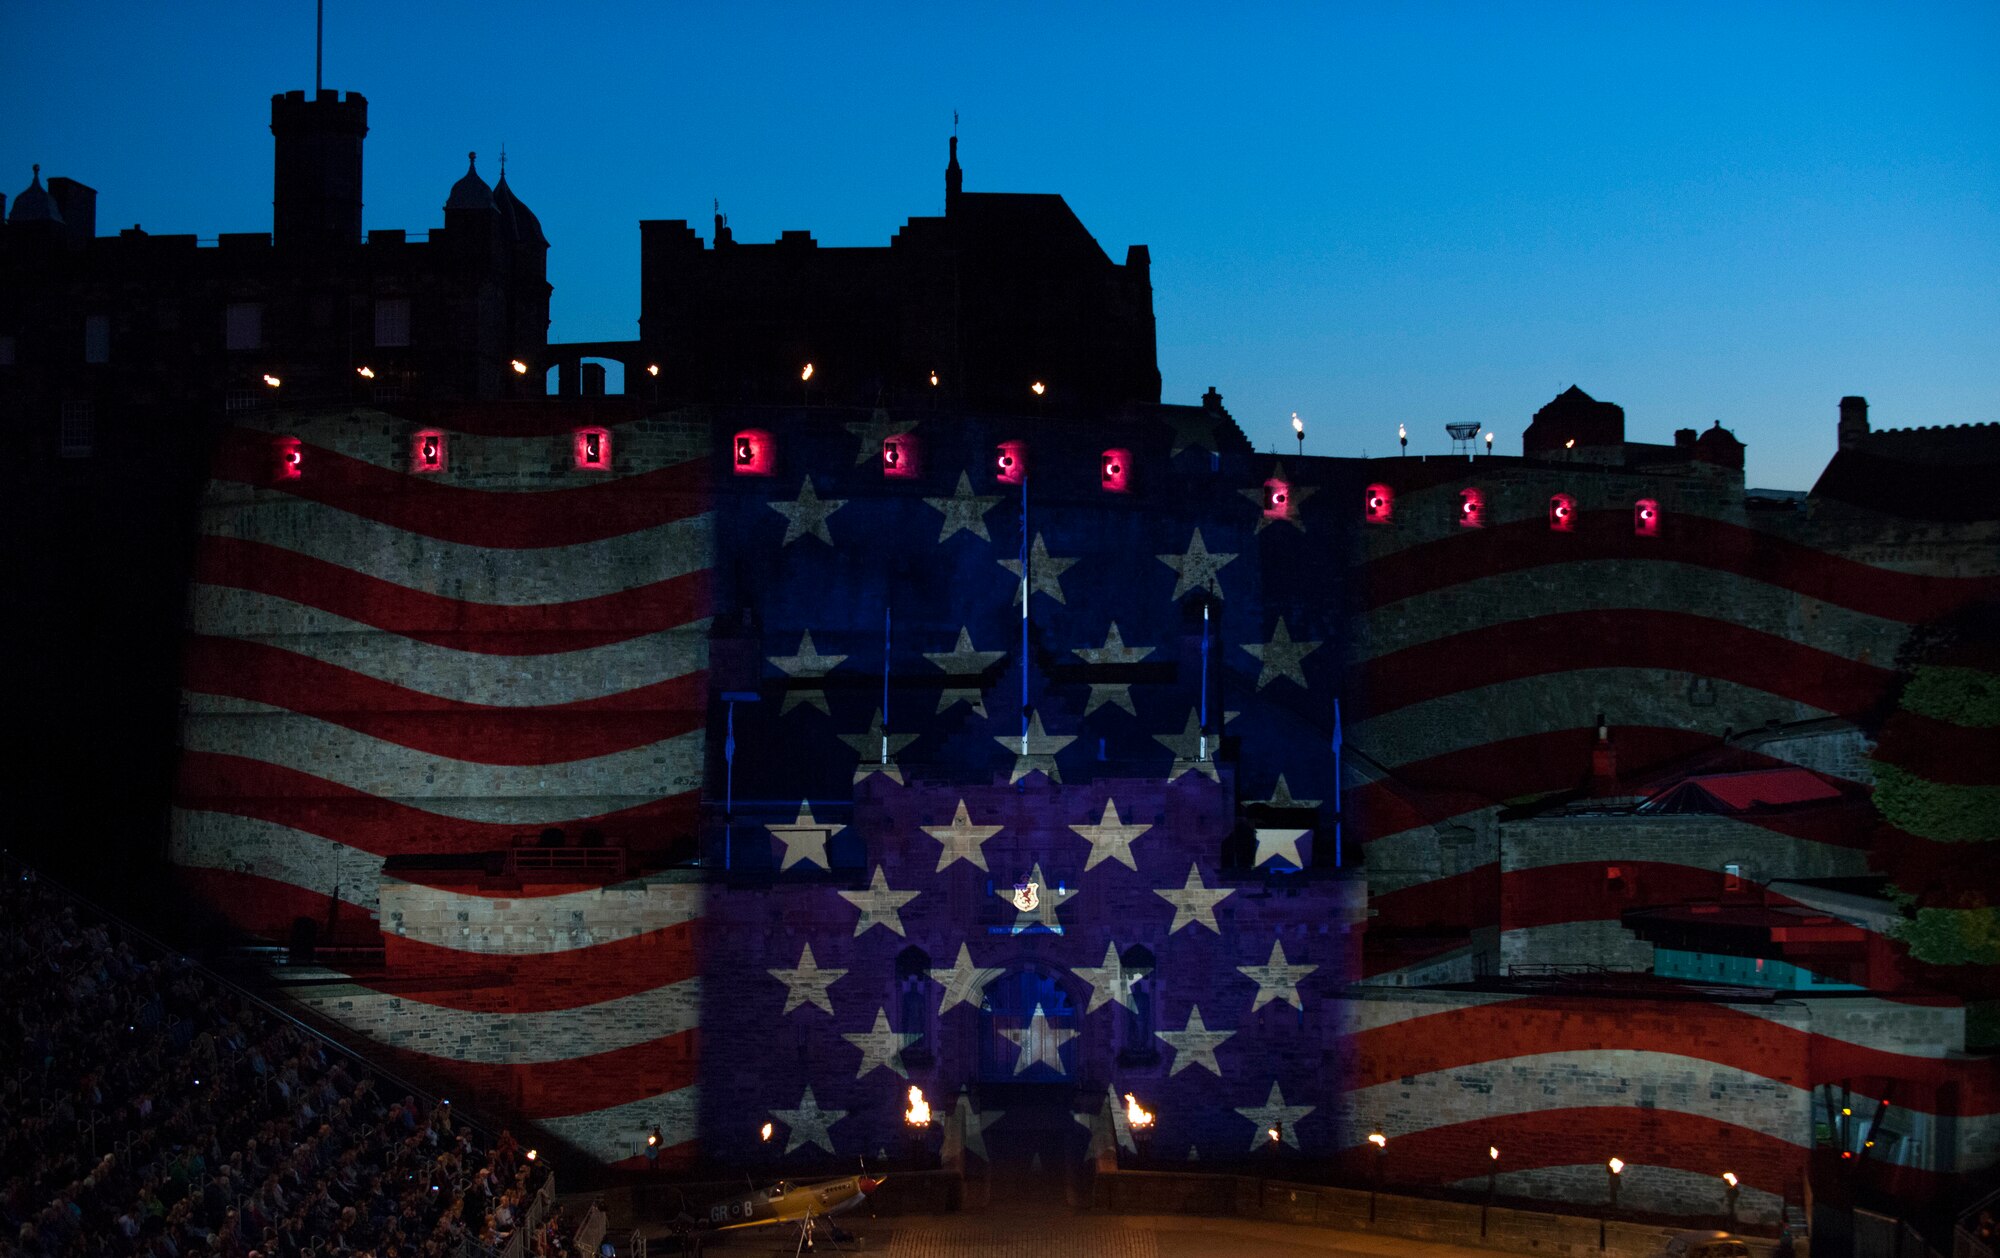 Red, white and blue stars and stripes light up the Edinburgh Castle during the Royal Edinburgh Military Tattoo in Edinburgh, Scotland, Aug. 11, 2015. The castle was lit to depict the American flag during a performance by the Citadel Regimental Band and Pipes symbolizing U.S. participating in the military tattoo. The Citadel band represented the U.S. alongside the U.S. Air Force Honor Guard Drill Team during the tattoo Aug. 7-29. The Citadel is a Military College located in Charleston, S.C. (U.S. Air Force Photo/Staff Sgt. Nichelle Anderson/released)